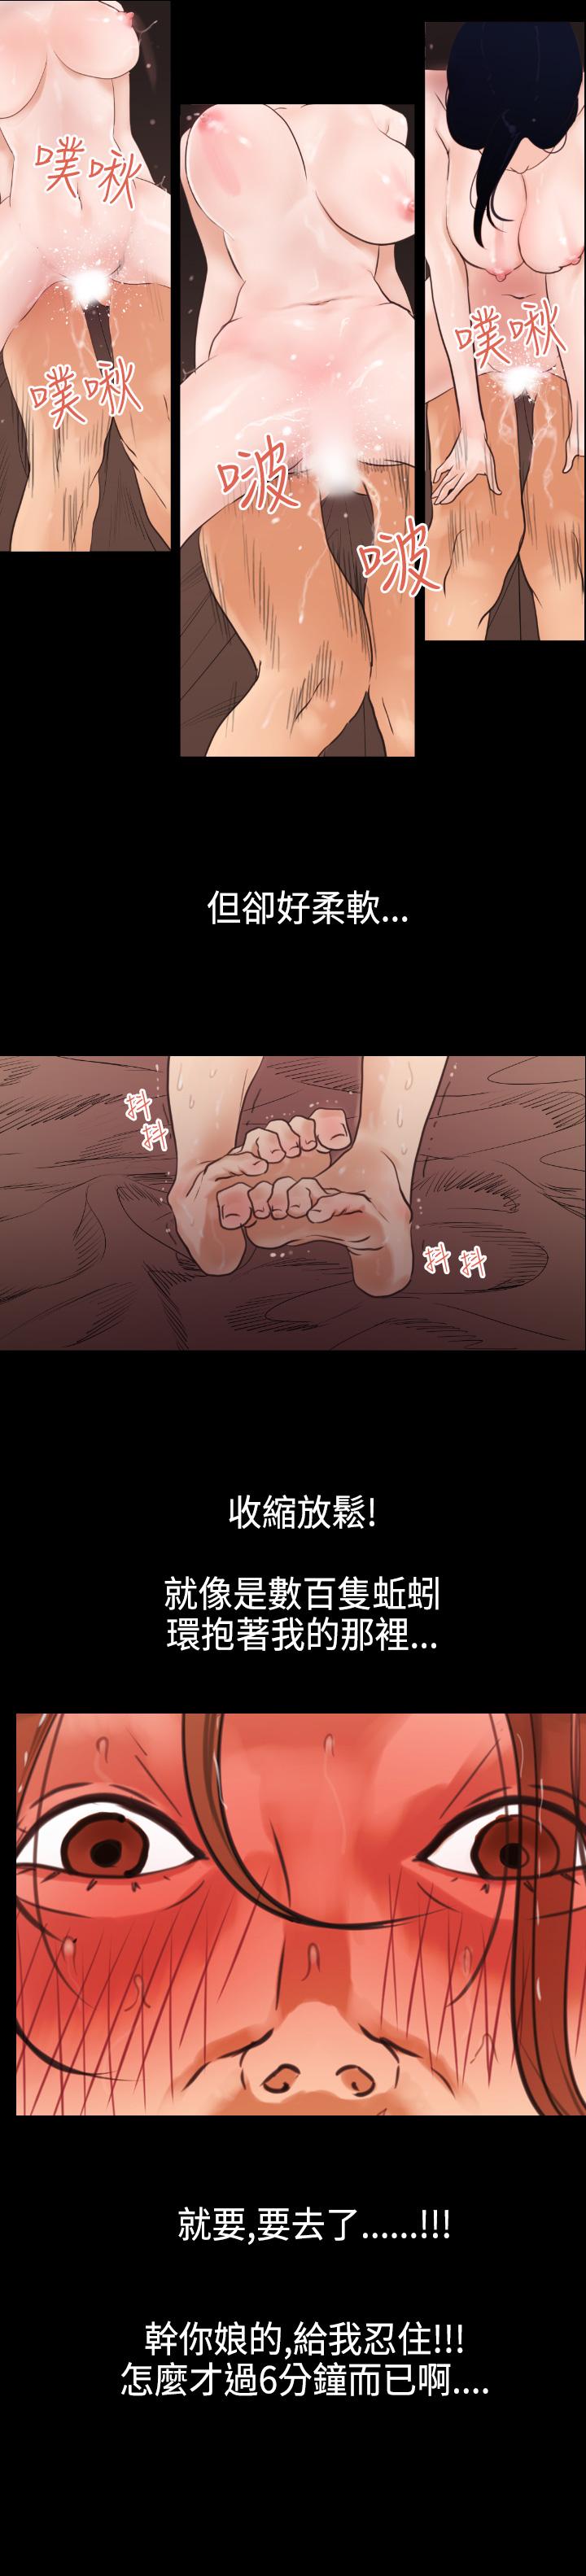 Desire King (慾求王) Ch.1-4 (chinese) 6